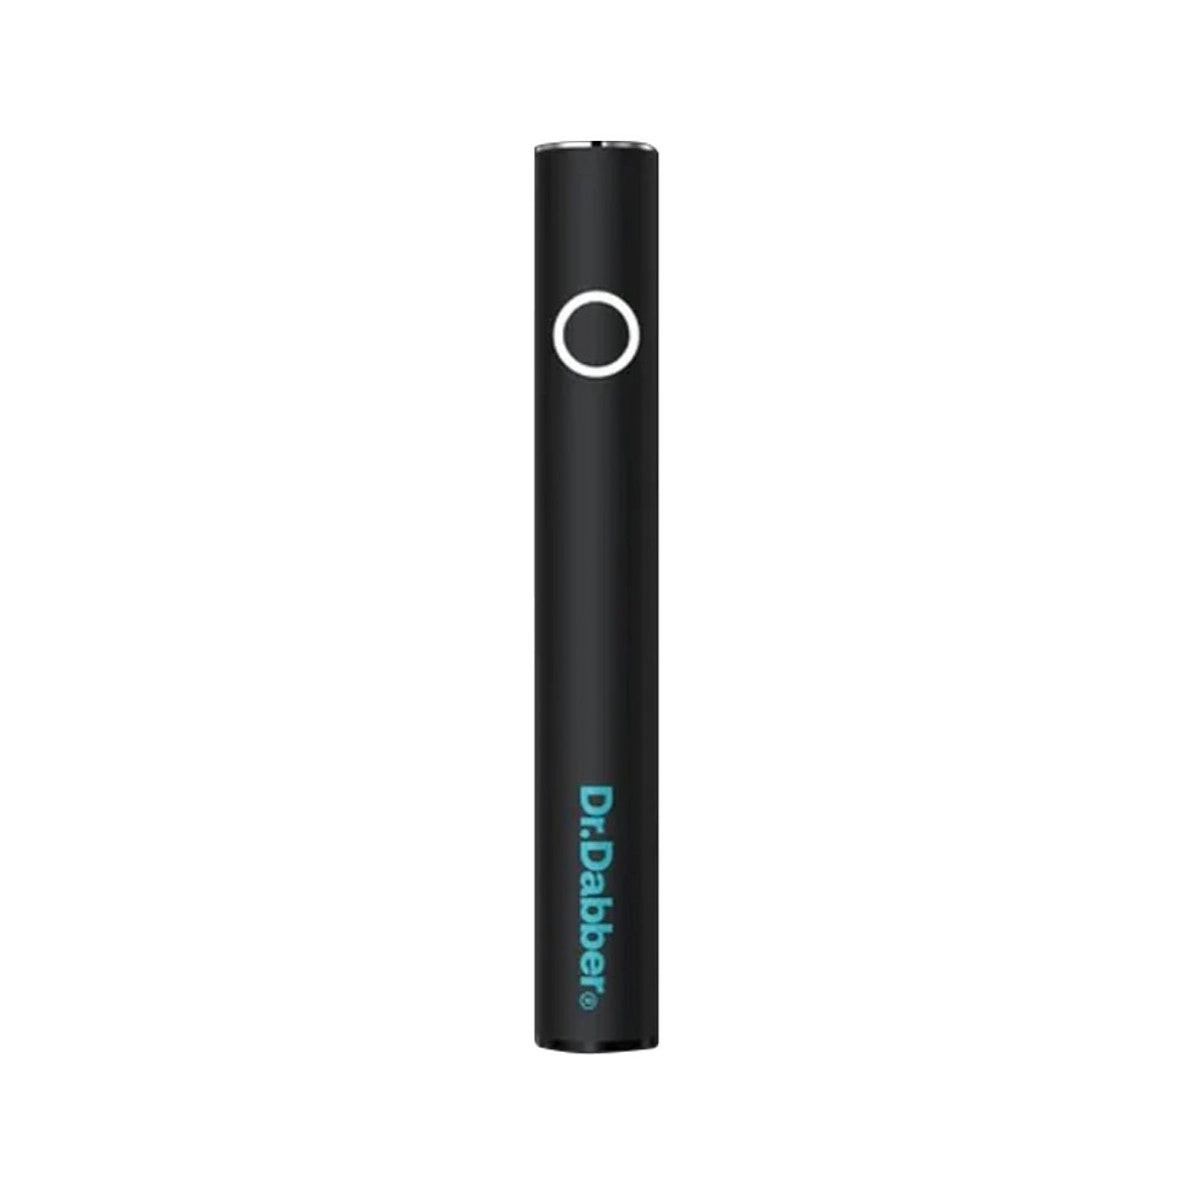 Universal 510 Battery w/Charger - Black | Dr. Dabber